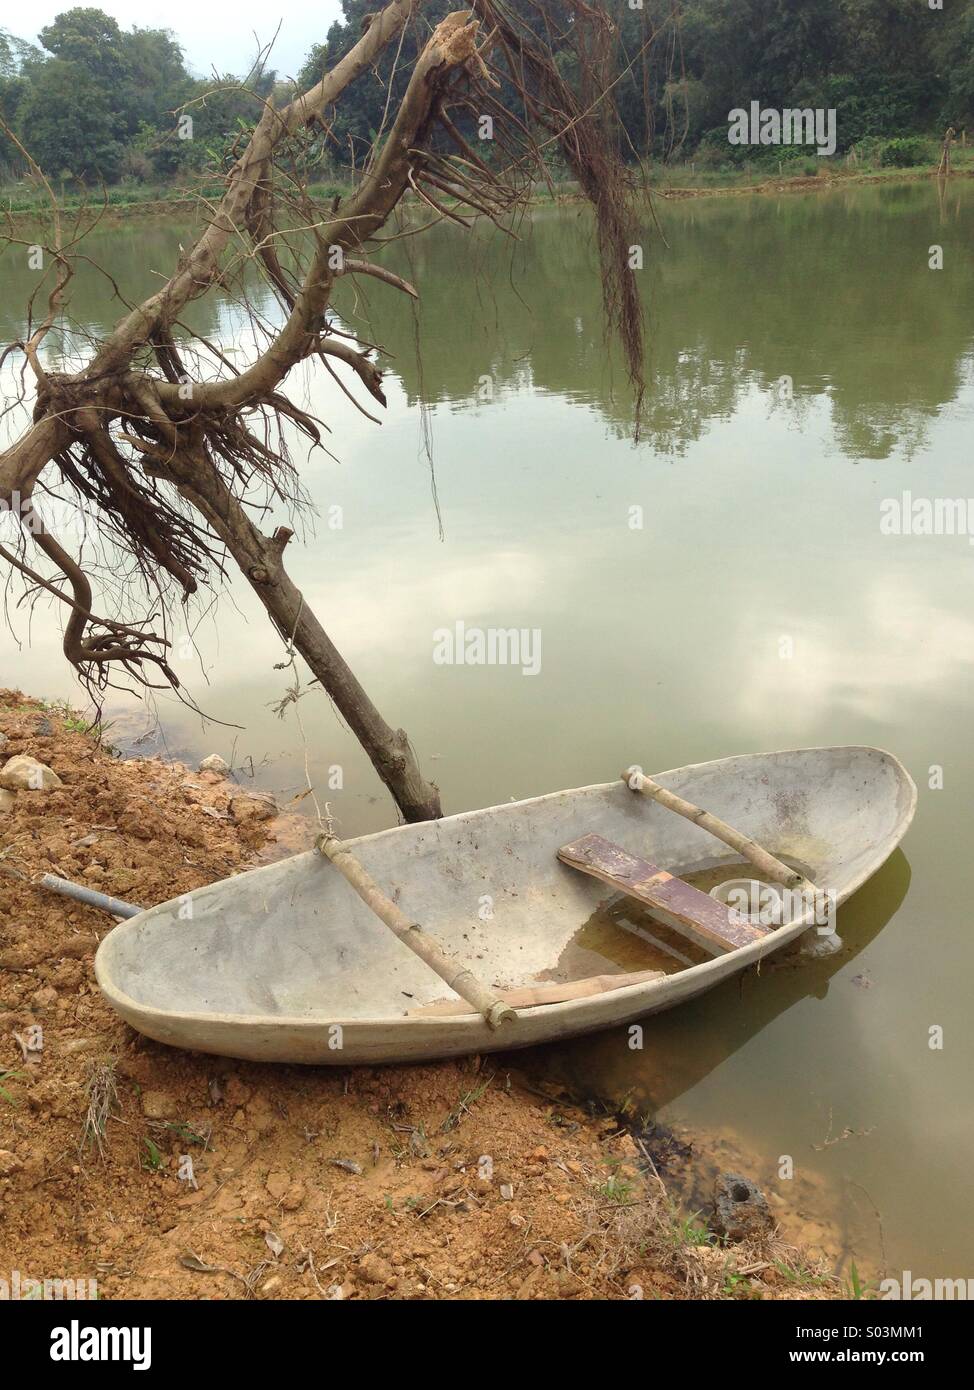 Small fishing boat on a lake side Stock Photo